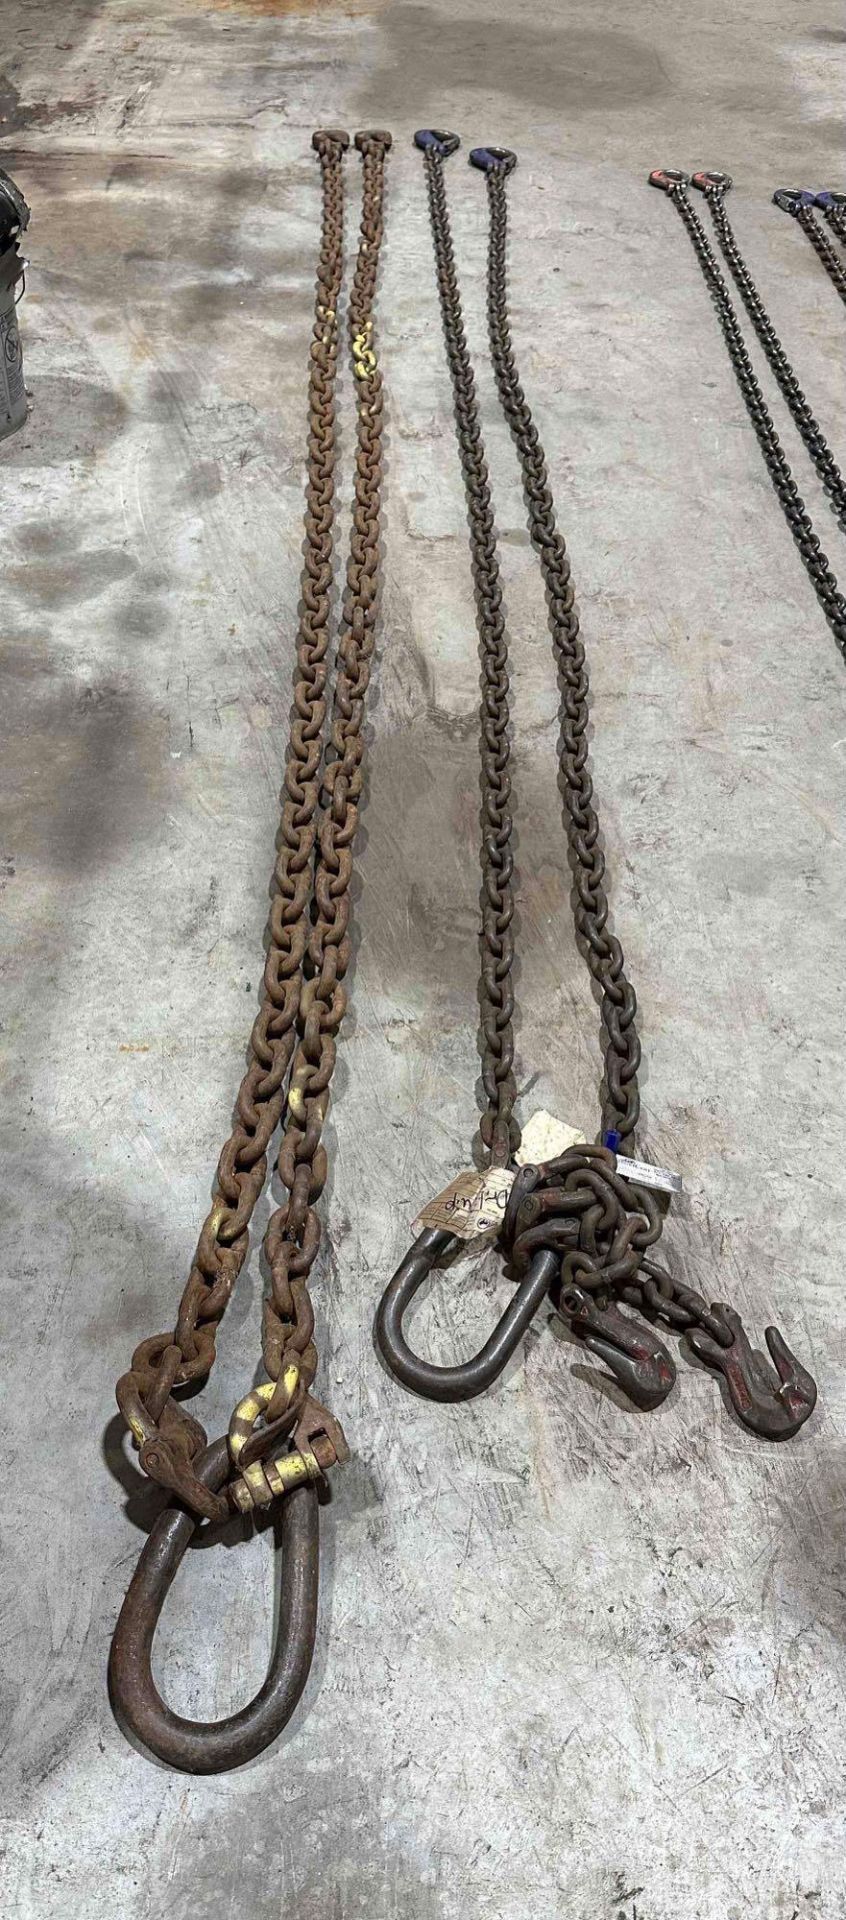 Lot of 2 Chains with Hooks, Assorted Lengths